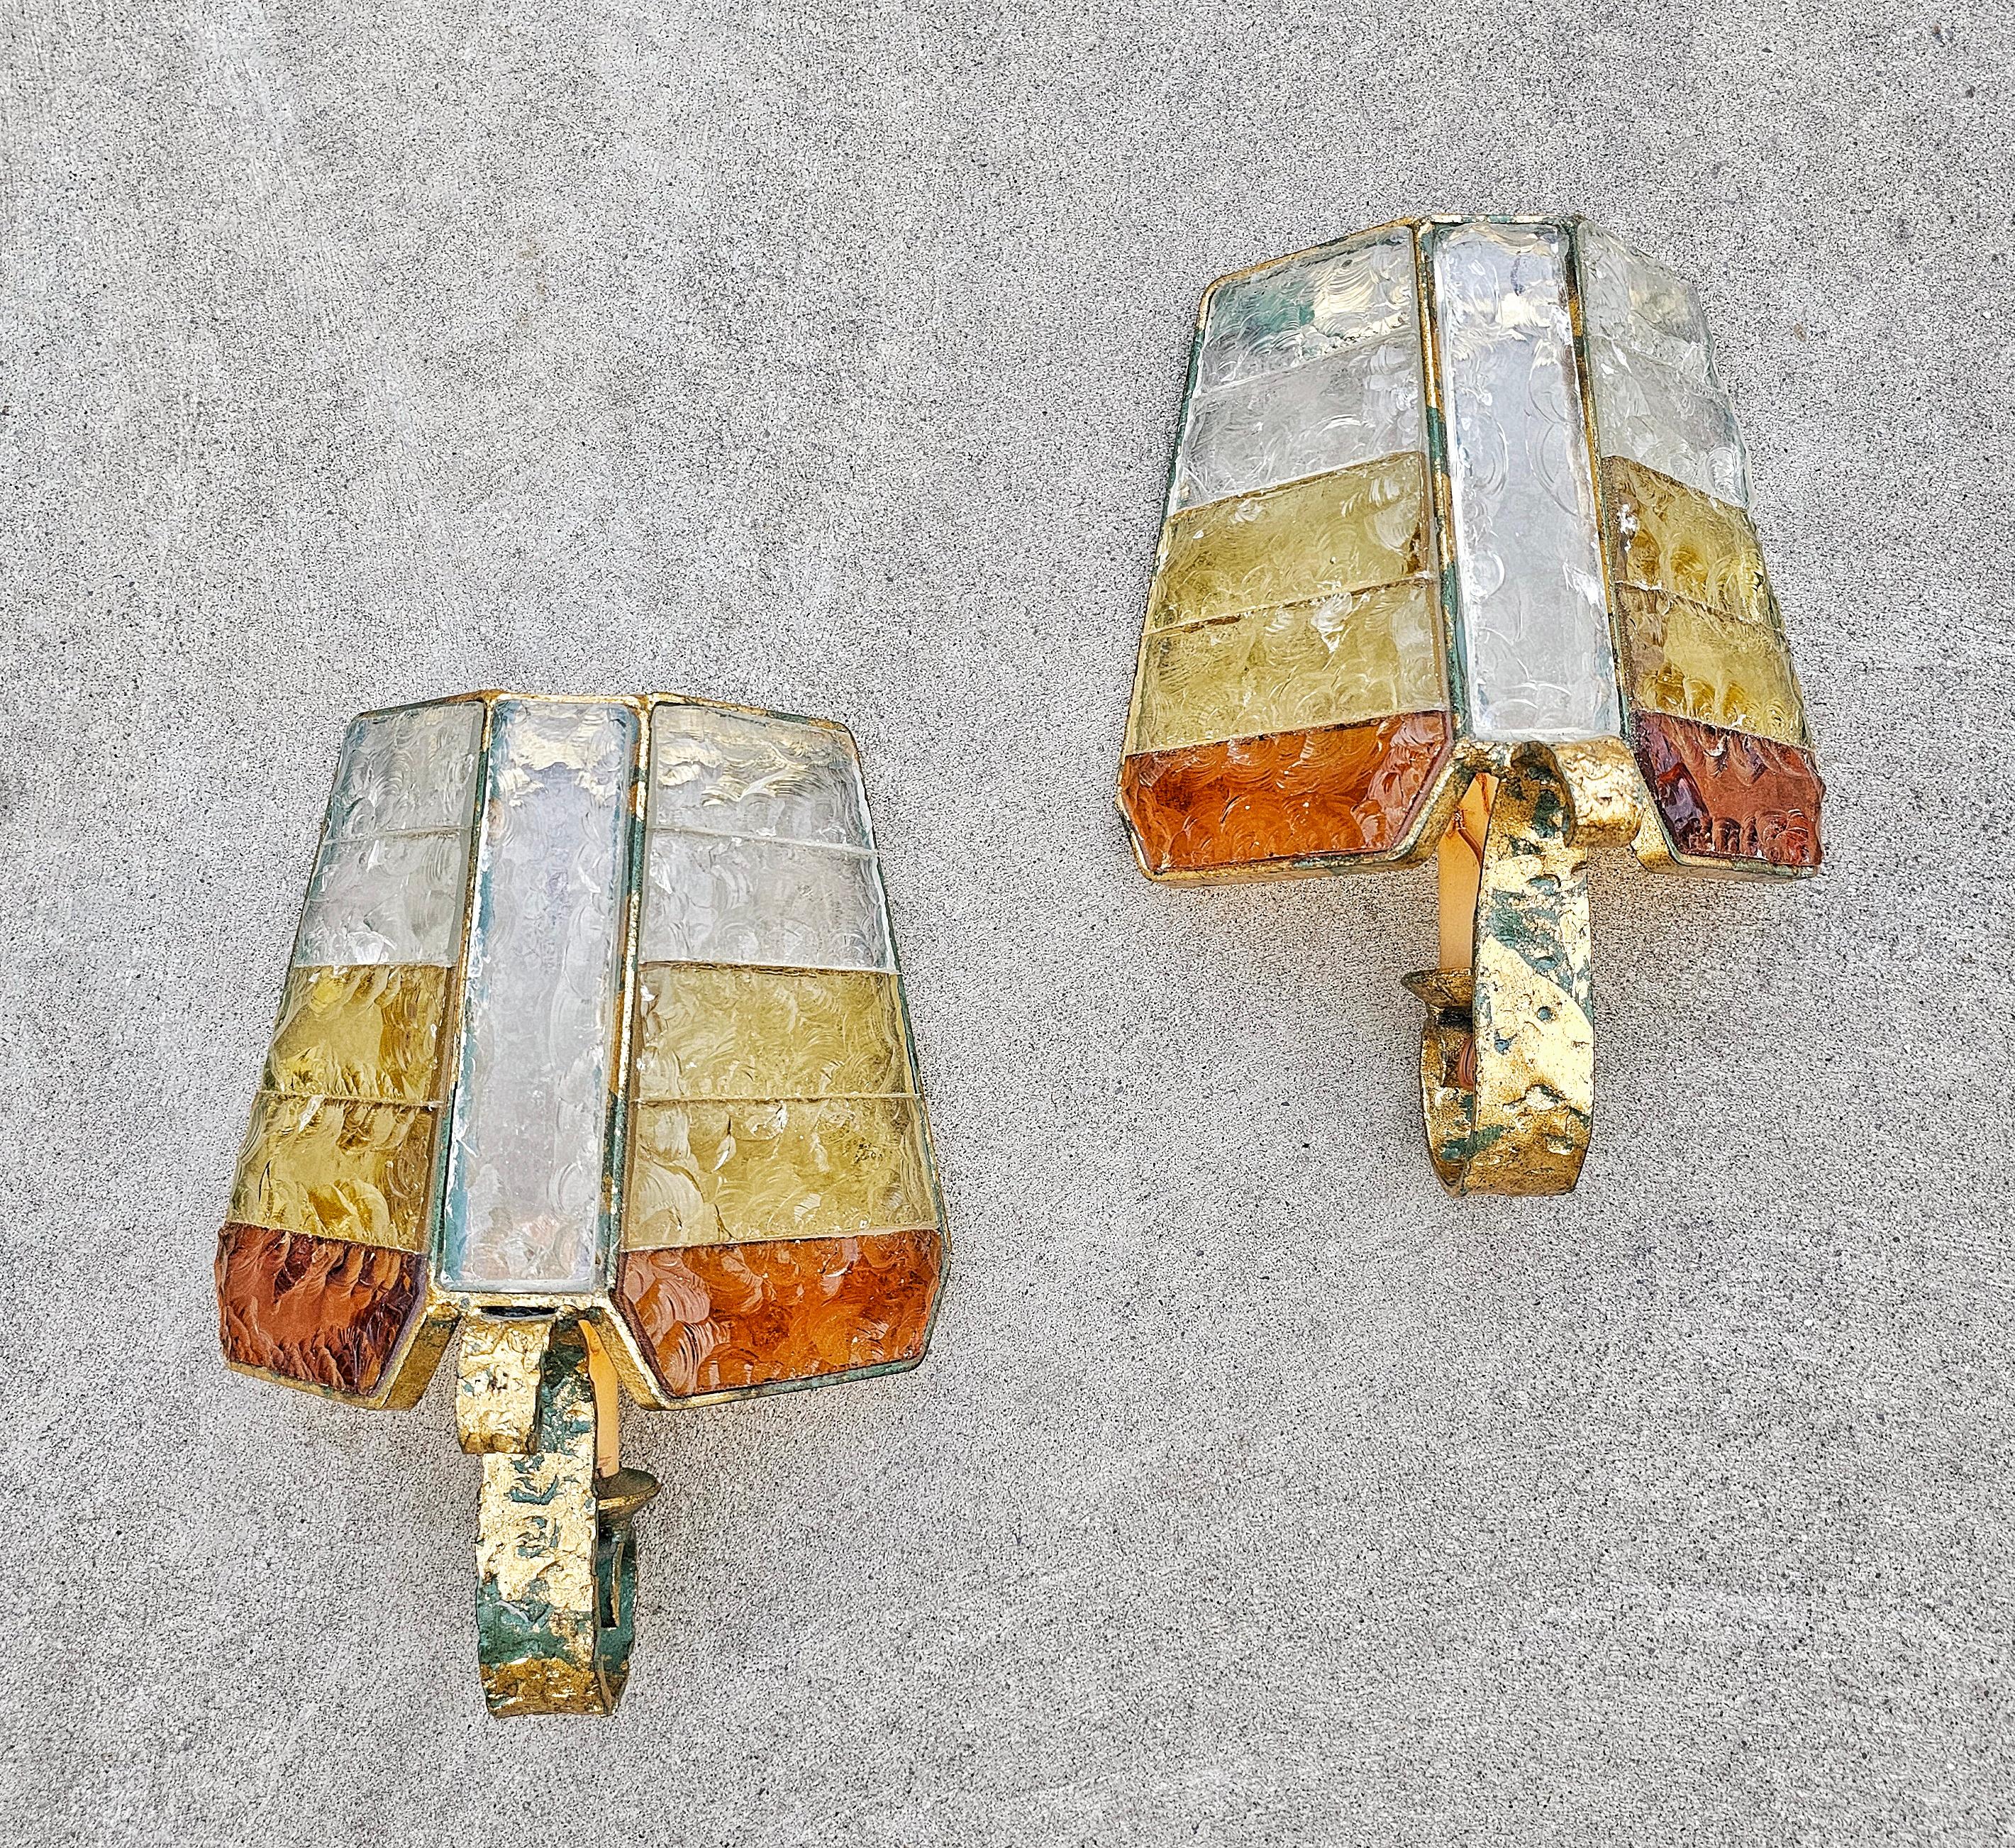 Pair of Brutalist Sconces in hammered glass by Longobard, Italy 1970s For Sale 3